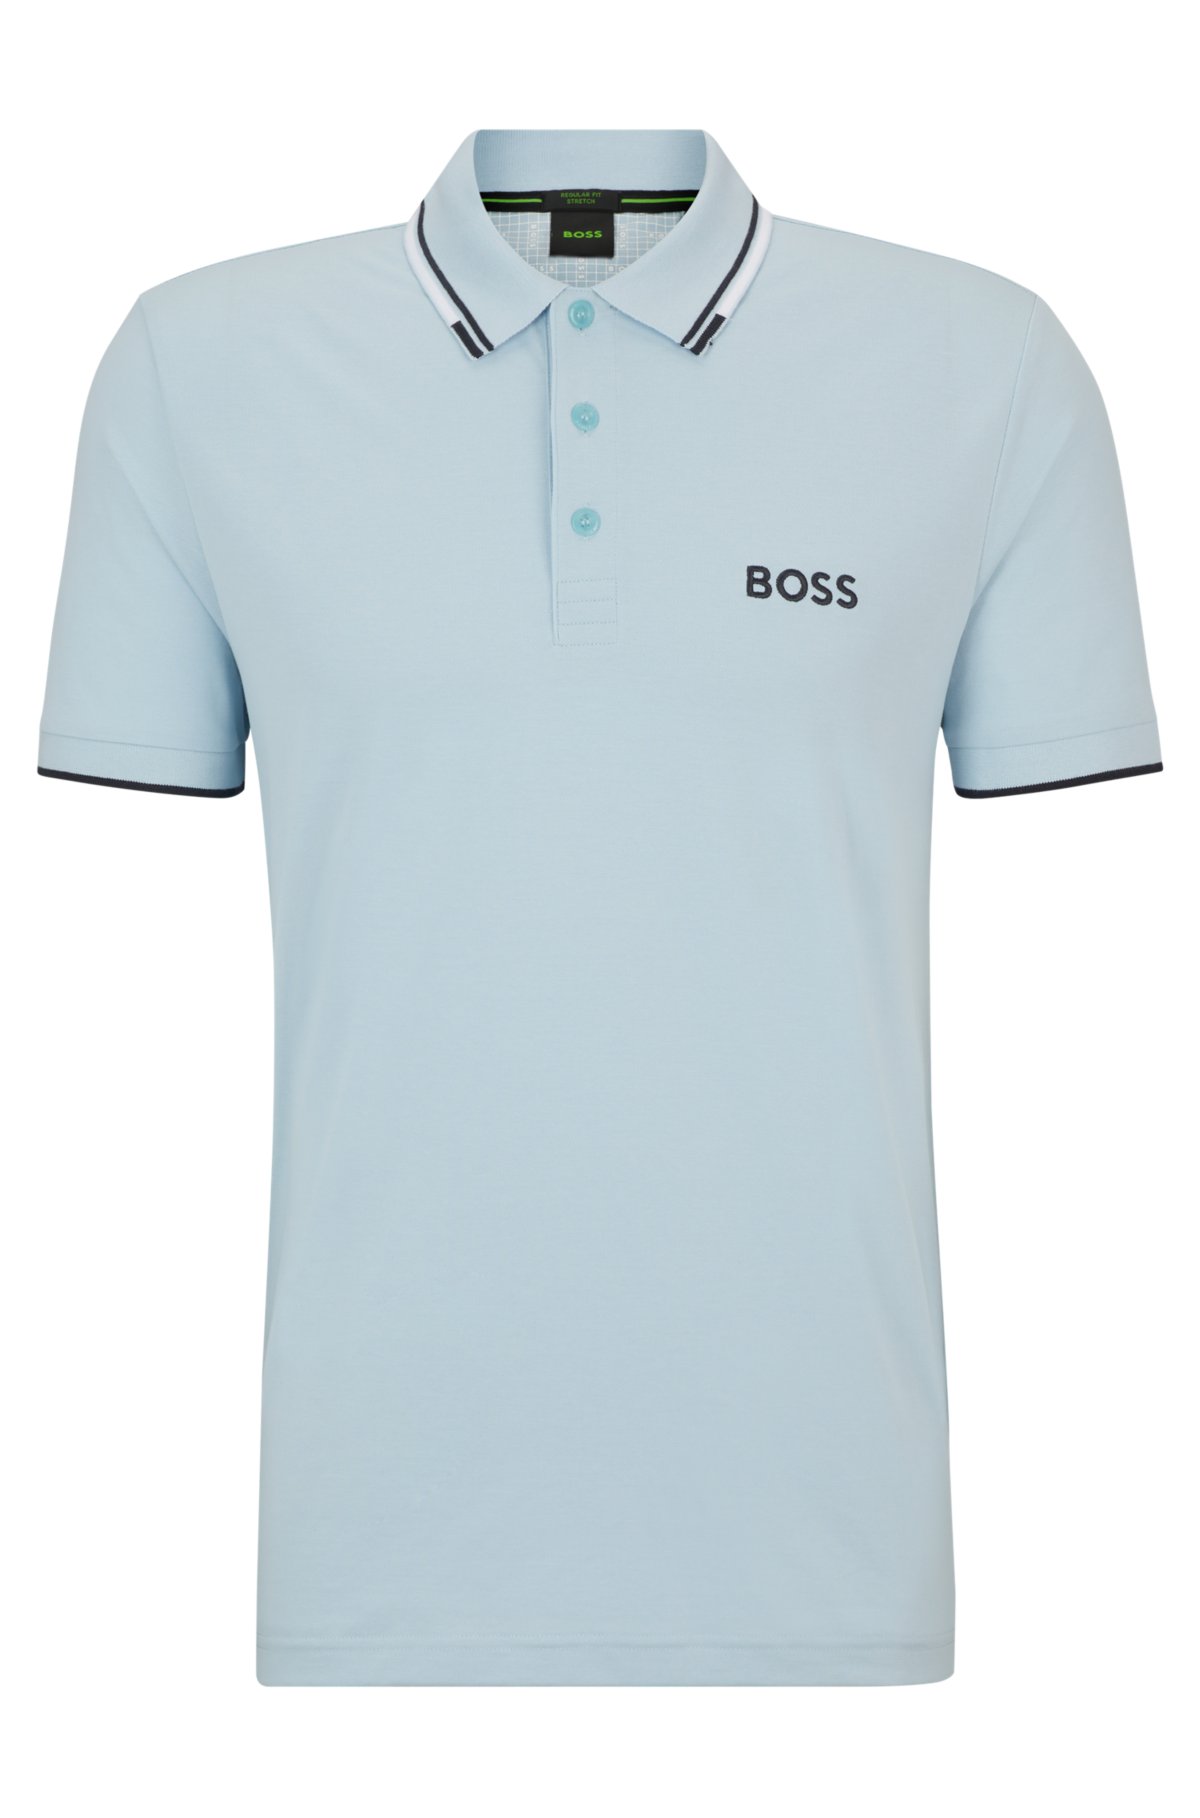 polo shirt details contrast Cotton-blend with - BOSS